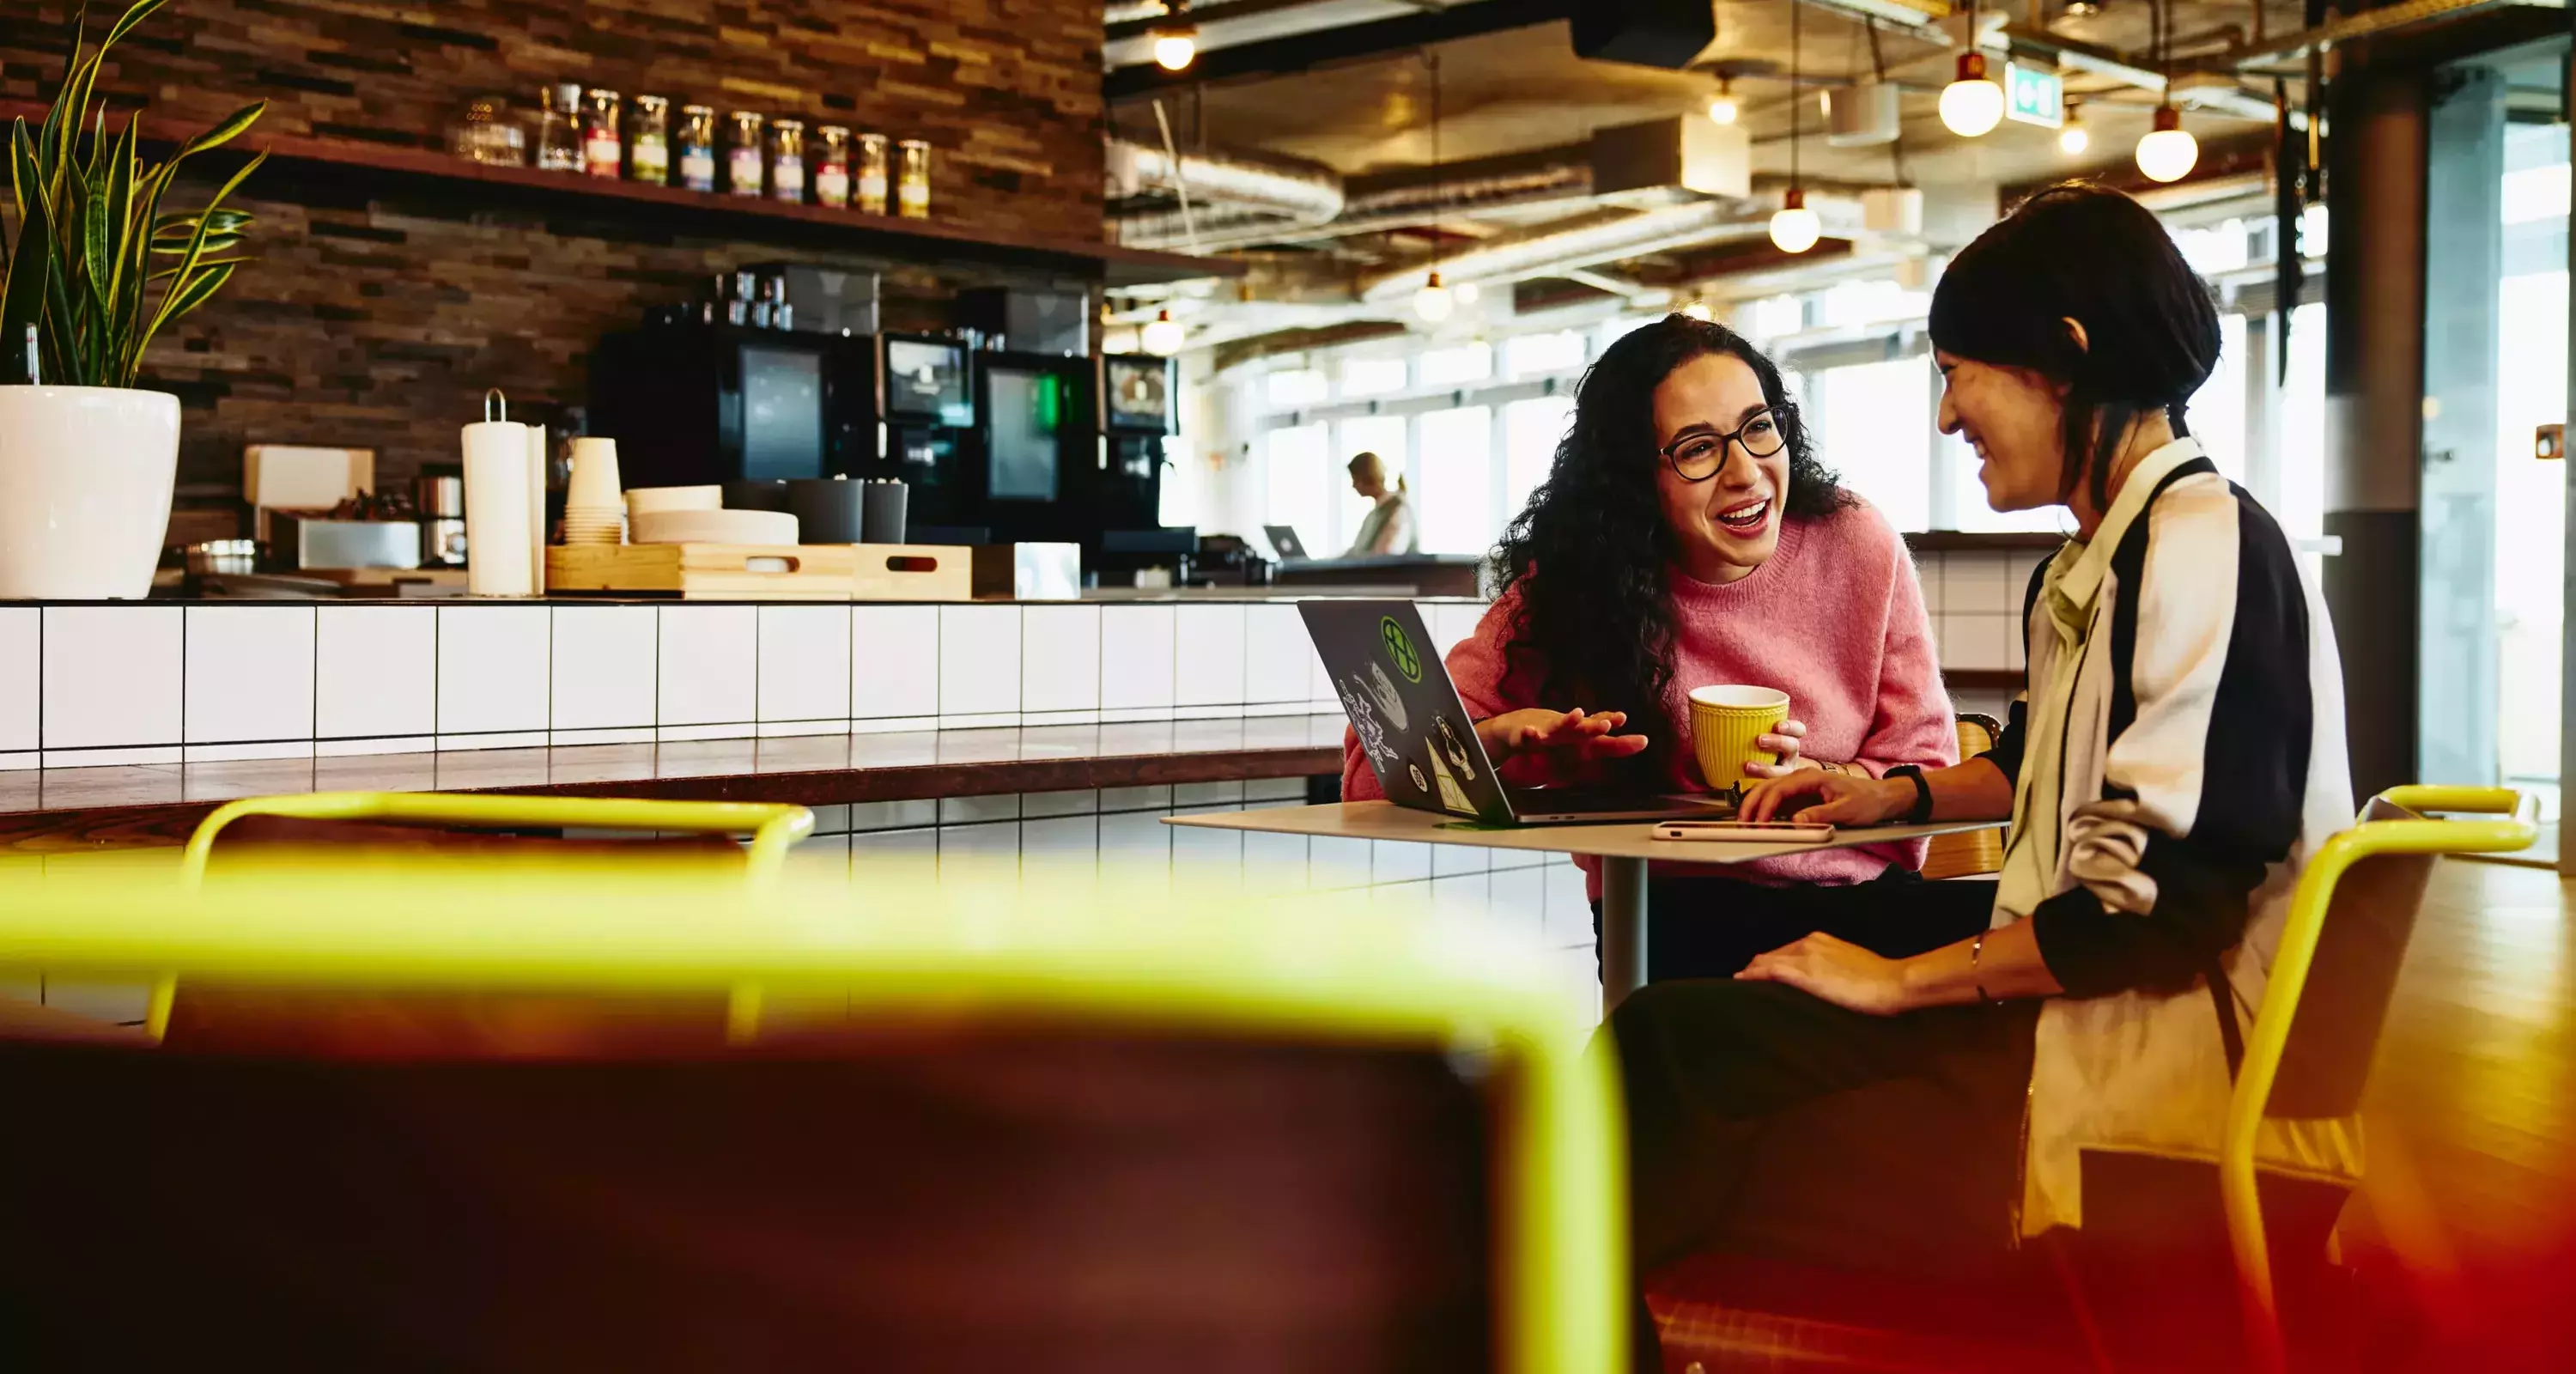 Two female sitting in restaurant having a converstation, looking at laptop, smiling.
